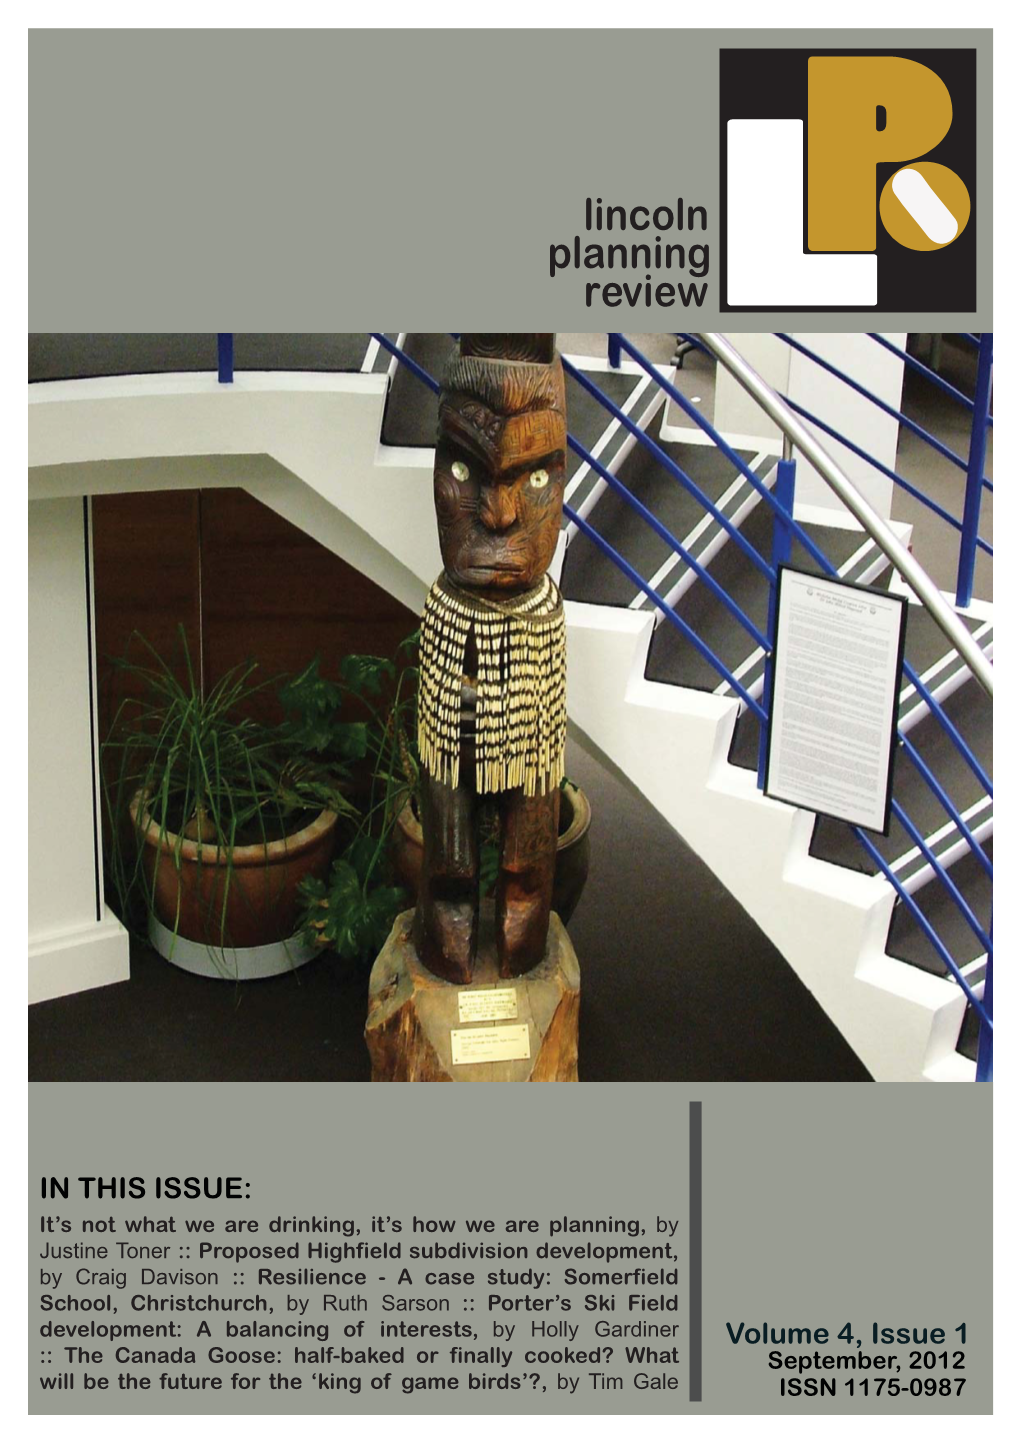 Lincoln Planning Review Volume 4, Issue 1 September 2012